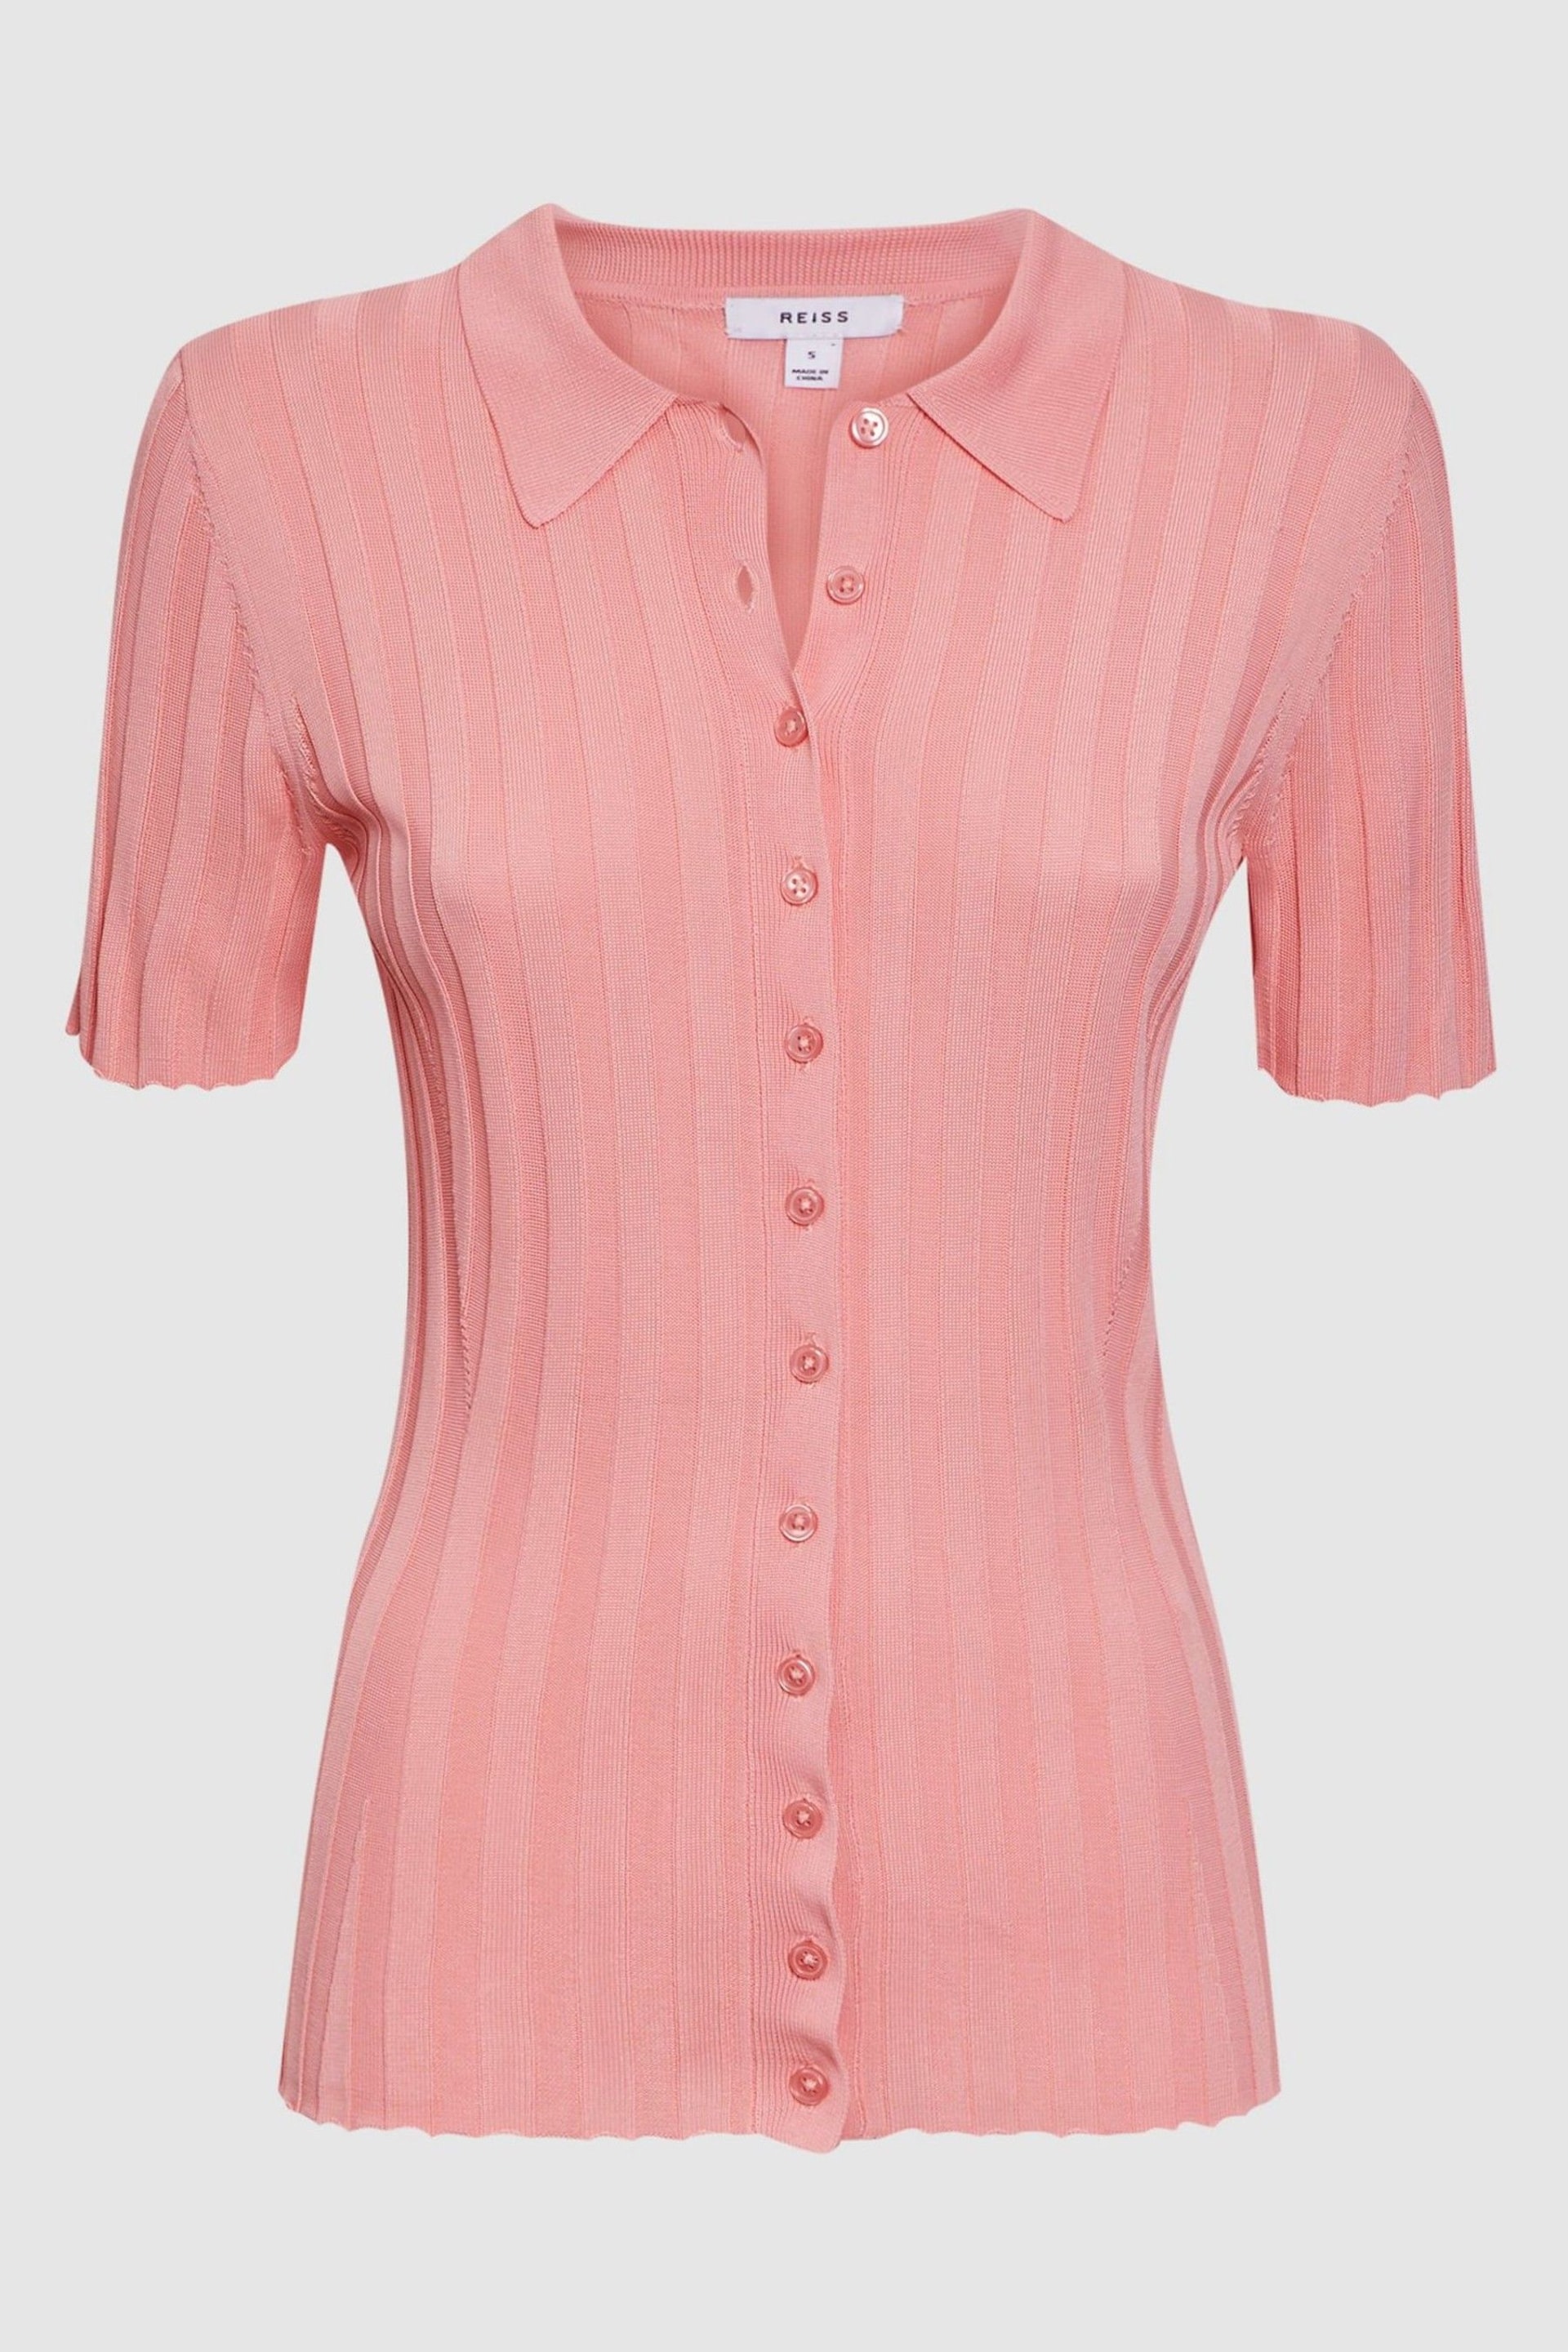 Reiss Pink Stella Fitted Striped Button Through T-Shirt - Image 2 of 5